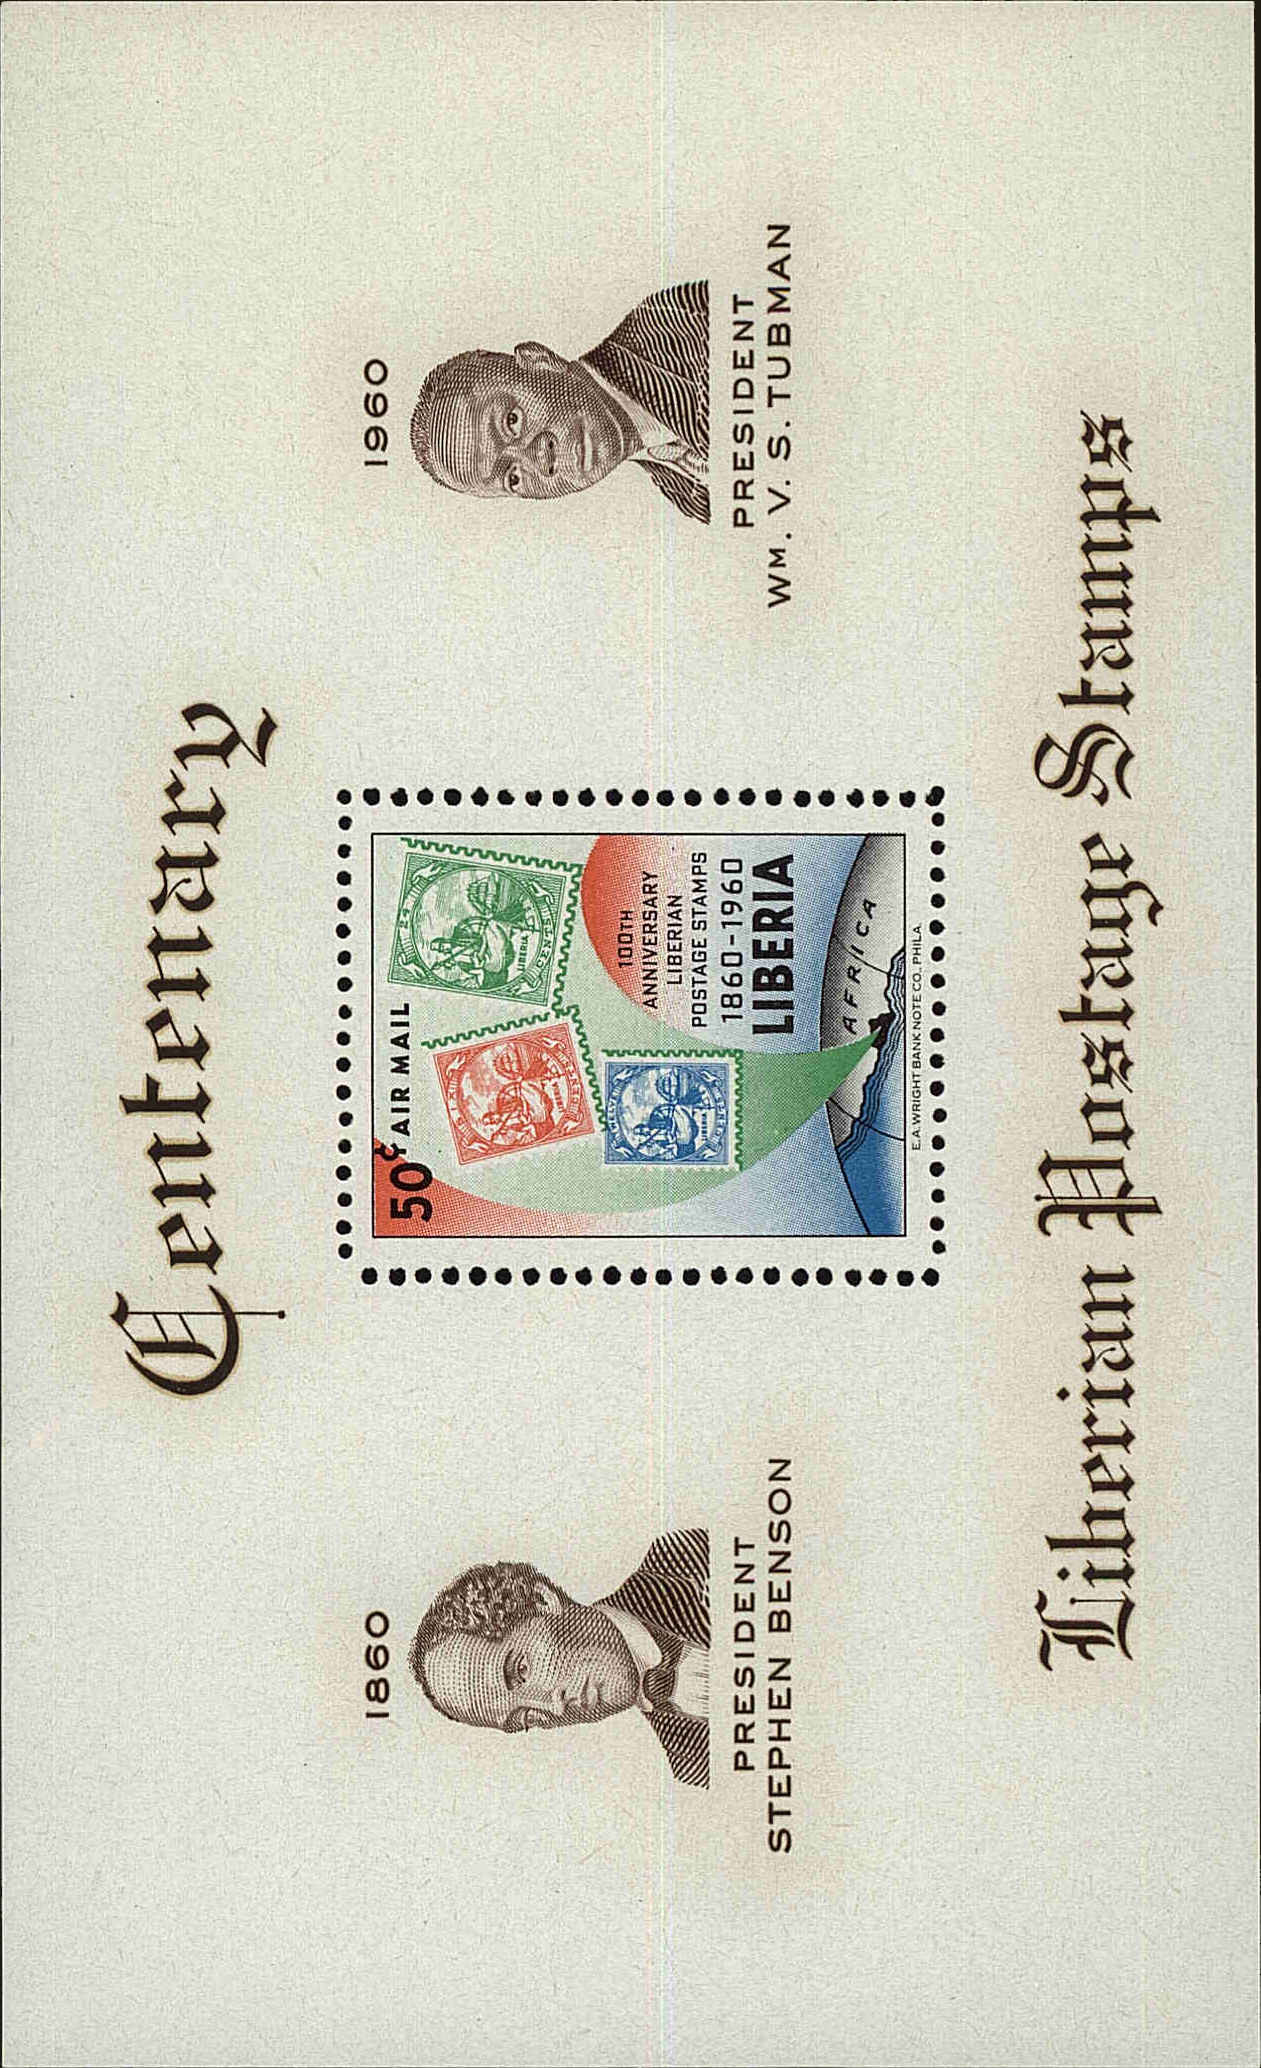 Front view of Liberia C129 collectors stamp